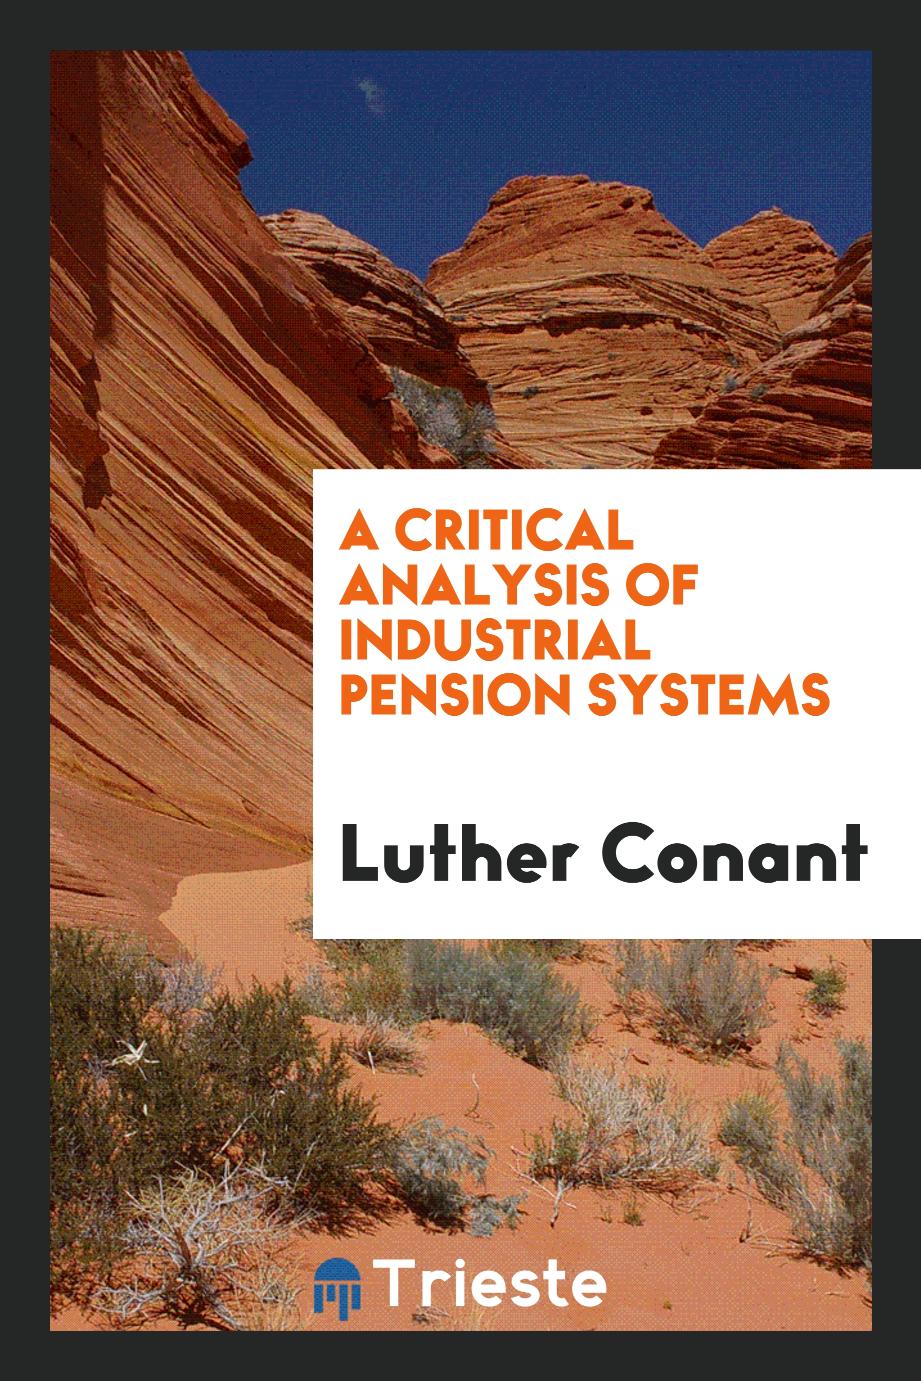 A critical analysis of industrial pension systems